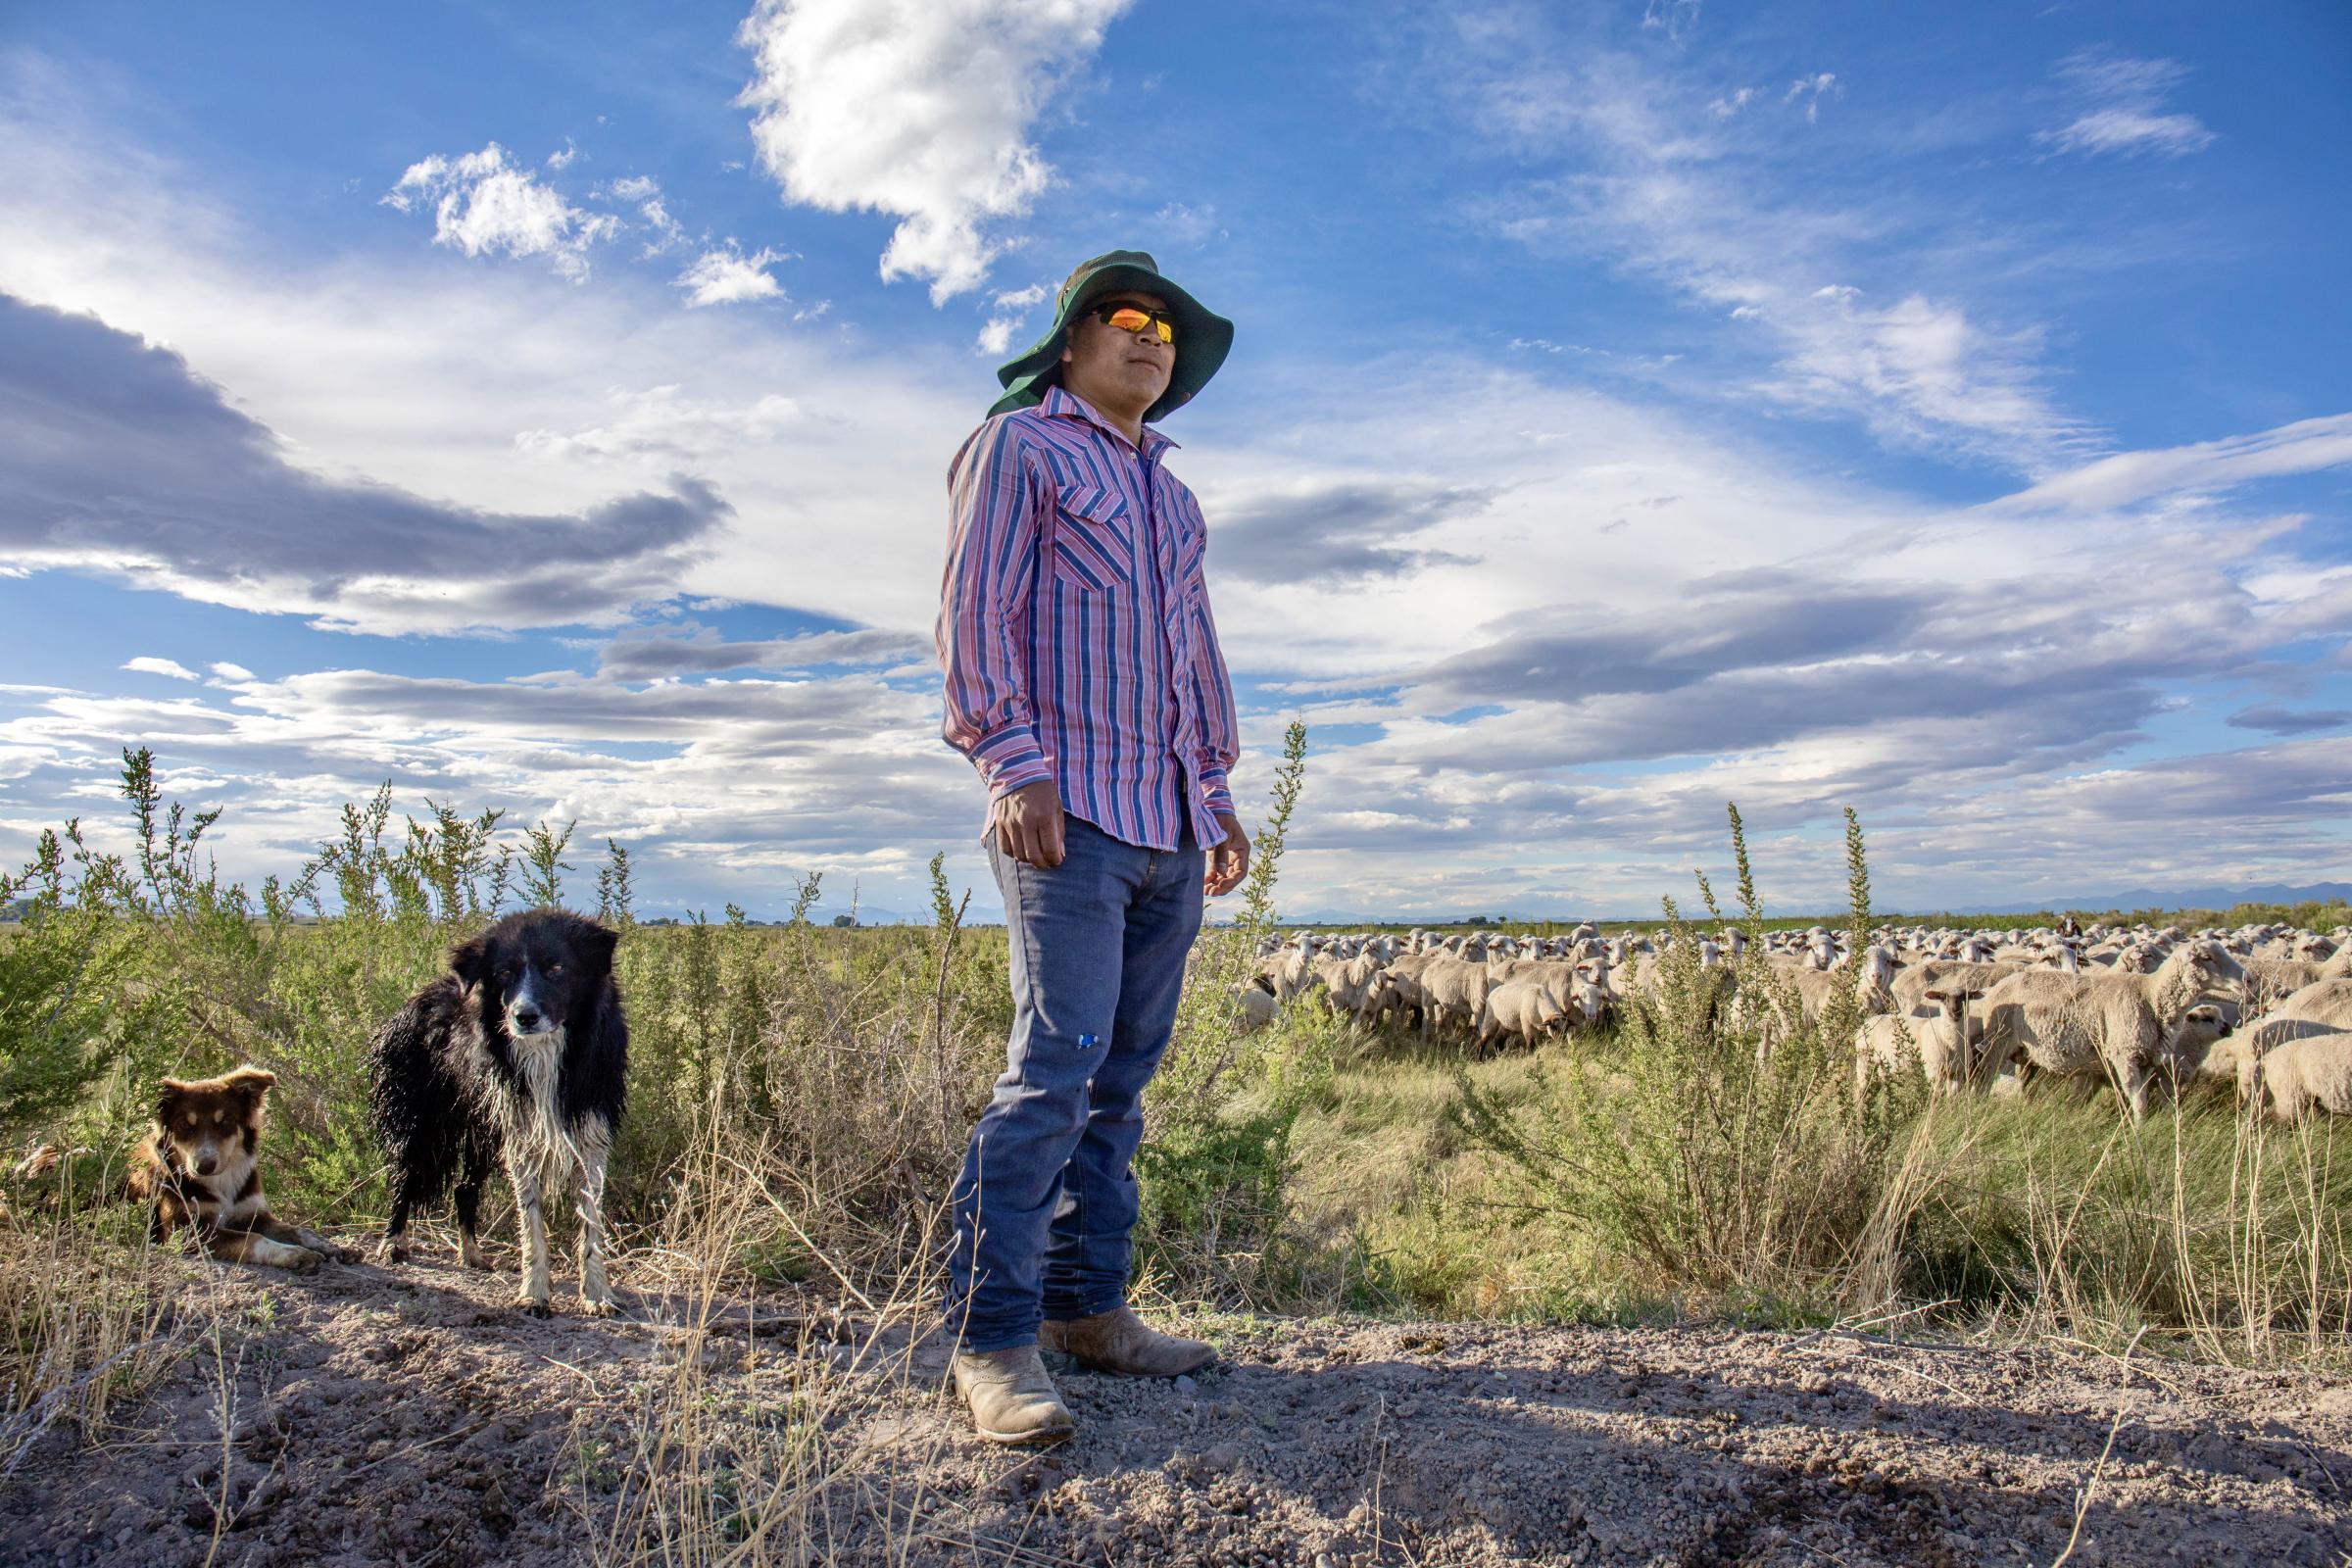 Crisis on the Rio Grande - Hector Sandoval cares for JD Schmidt&rsquo;s sheep in the San Luis Valley. Sandoval said the...